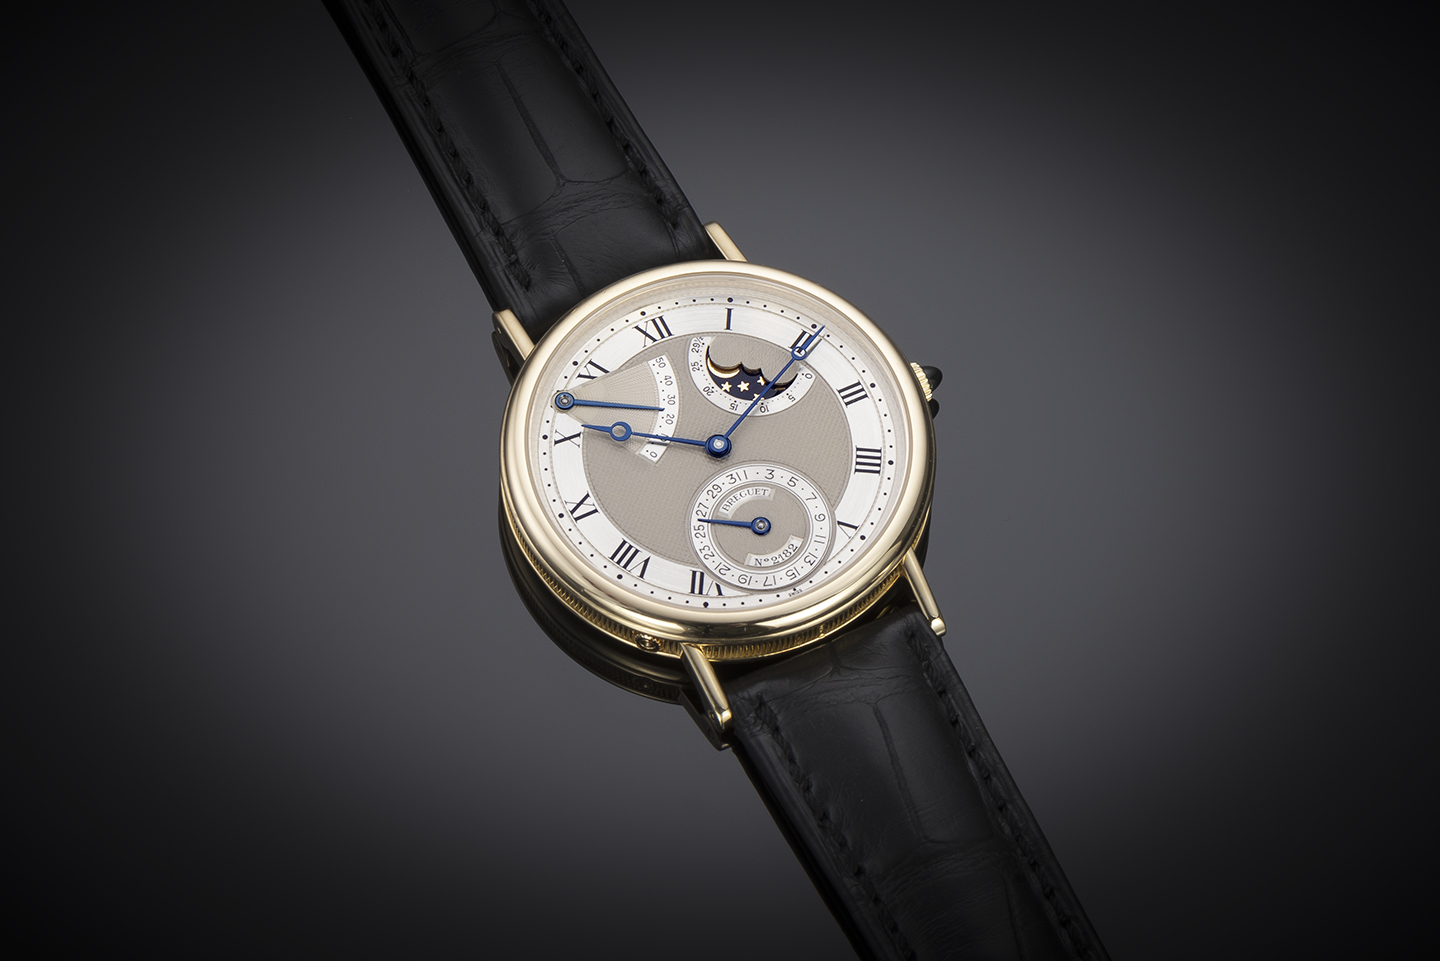 Breguet watch with gold complications – Service April 2022-1